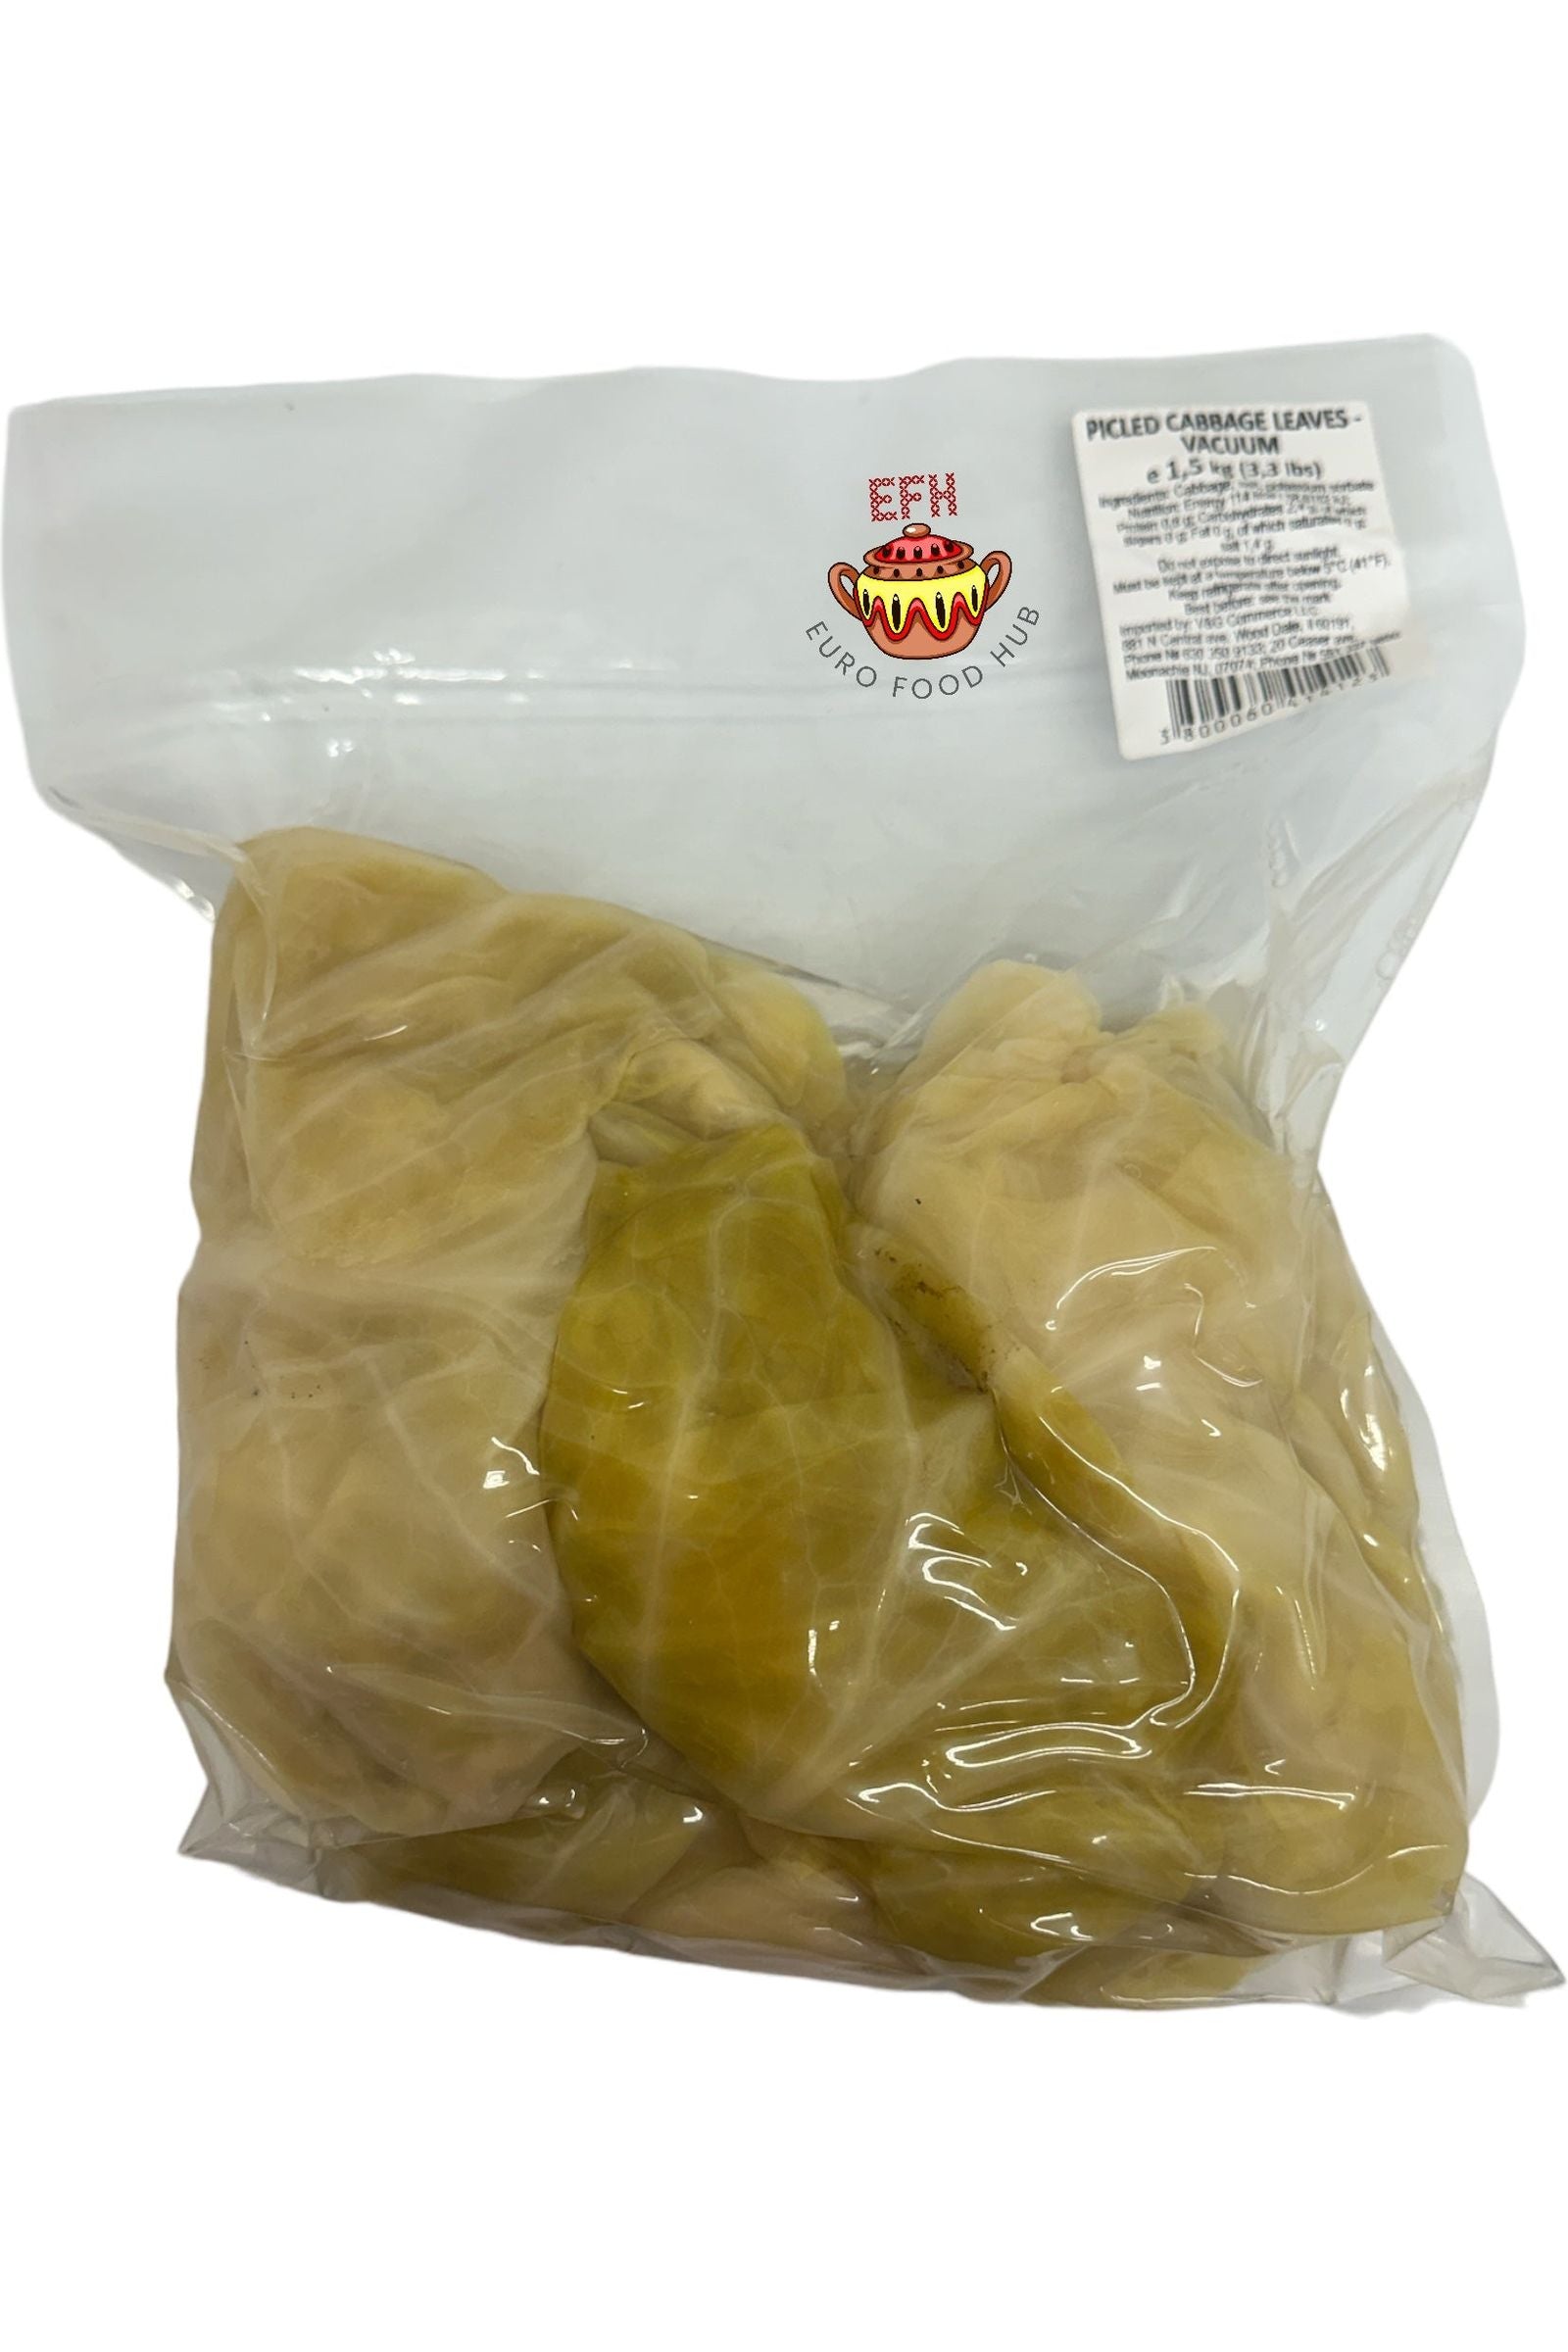 Bulgarian Sour Cabbage LEAVES - Pickled Cabbage - Sauerkraut - 3.3 lbs